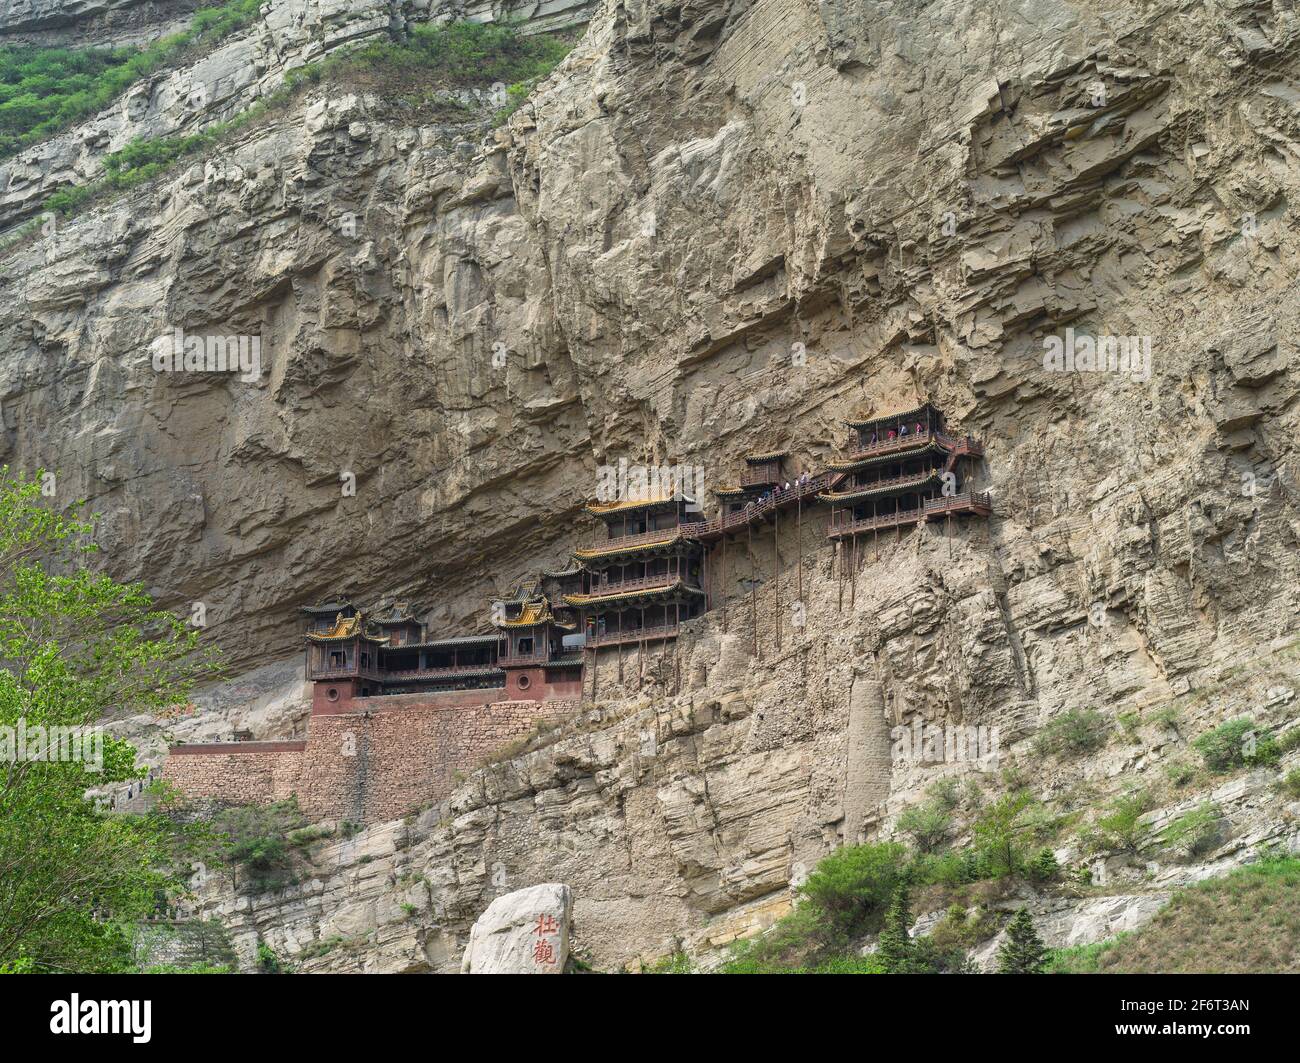 Built in 491, Hanging Monastery is an Architectural Wonder of the World, as it hangs on the West Cliff of Jinxia Gorge more than 50 meters above the Stock Photo